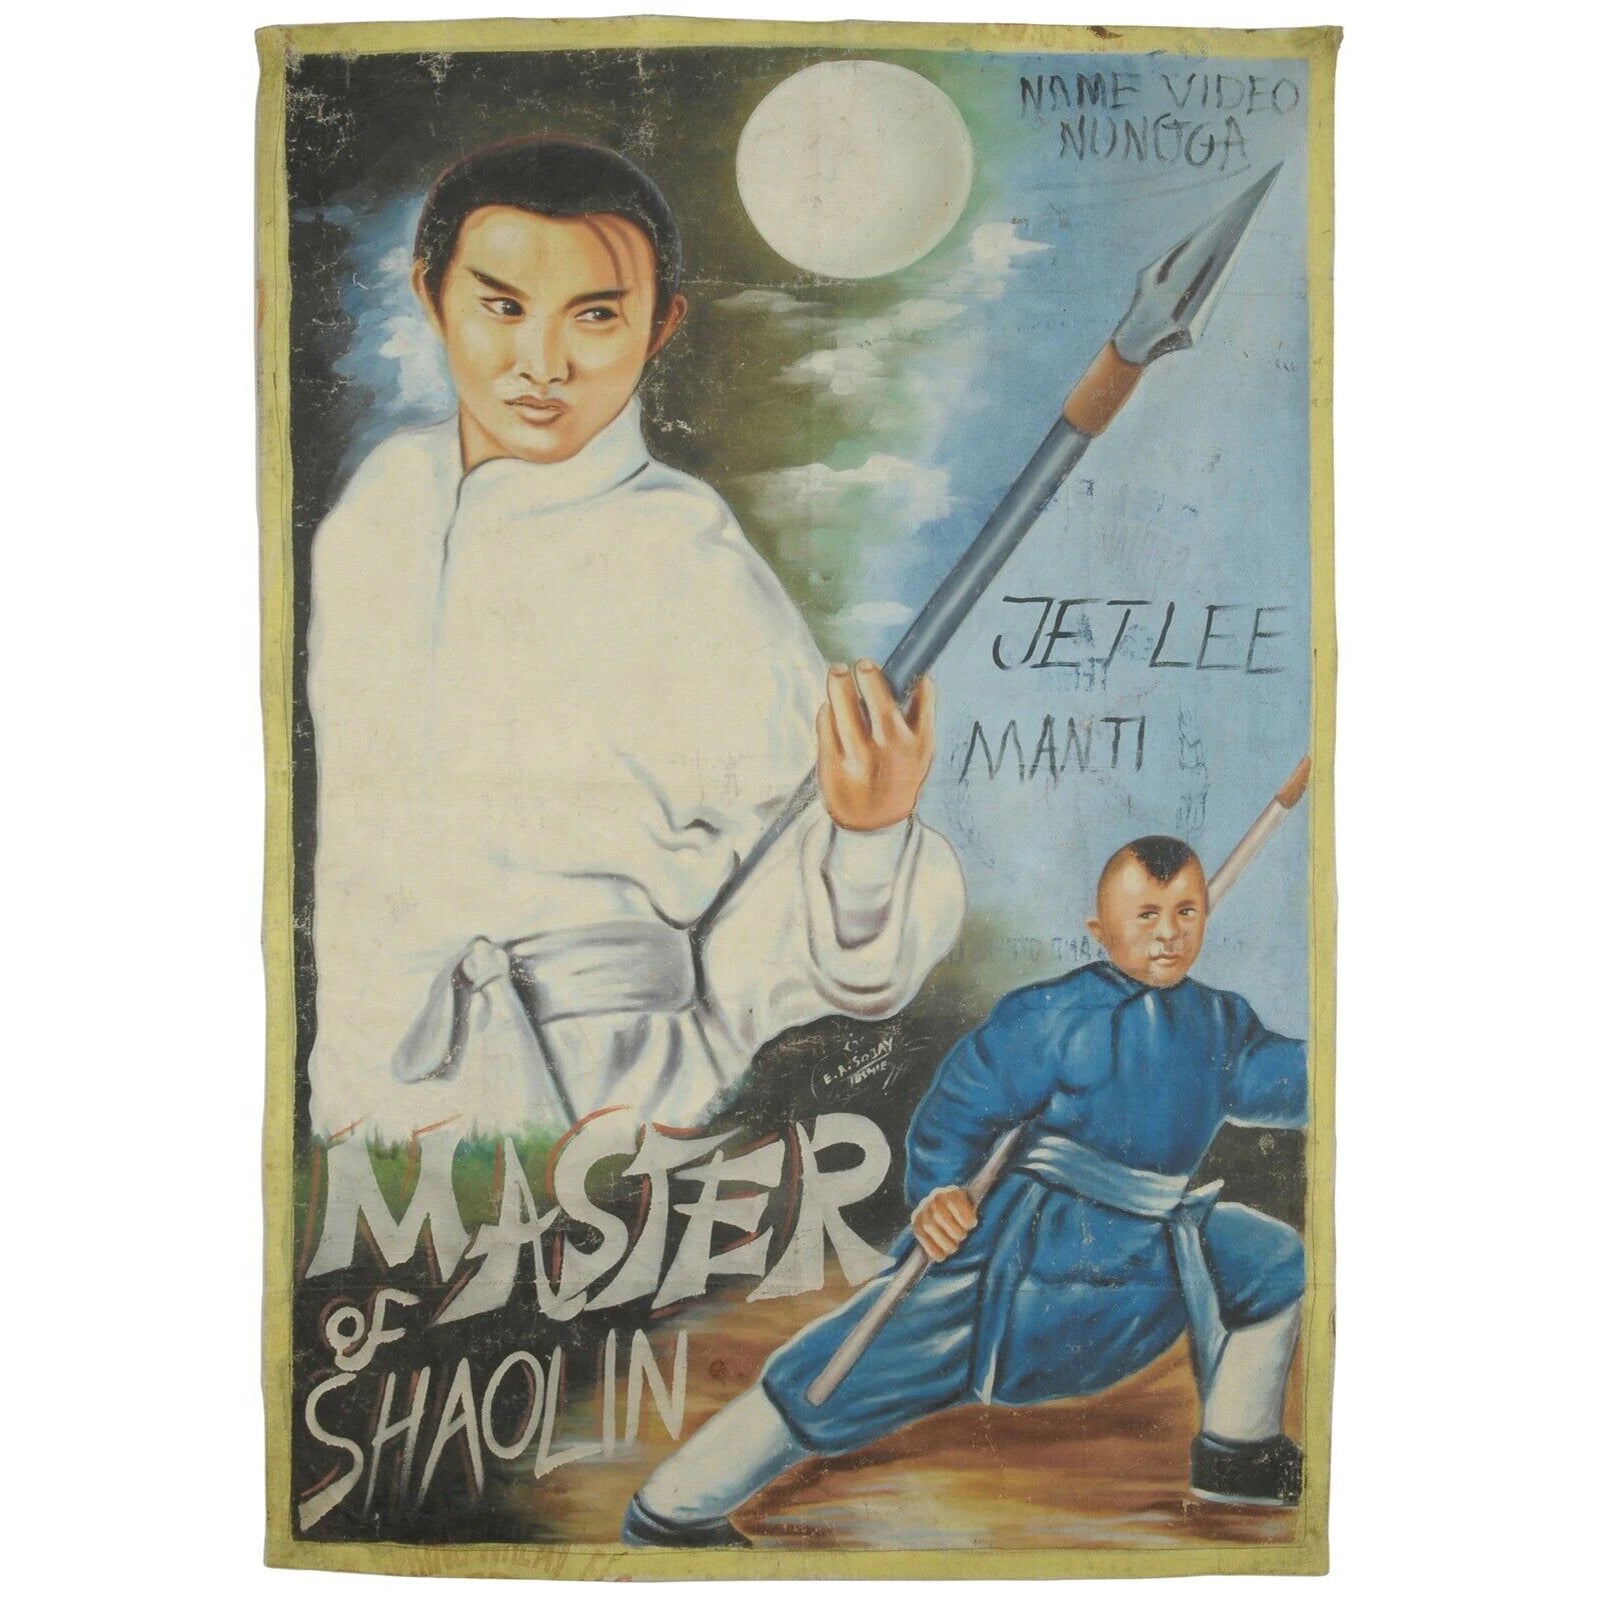 kung fu movie posters